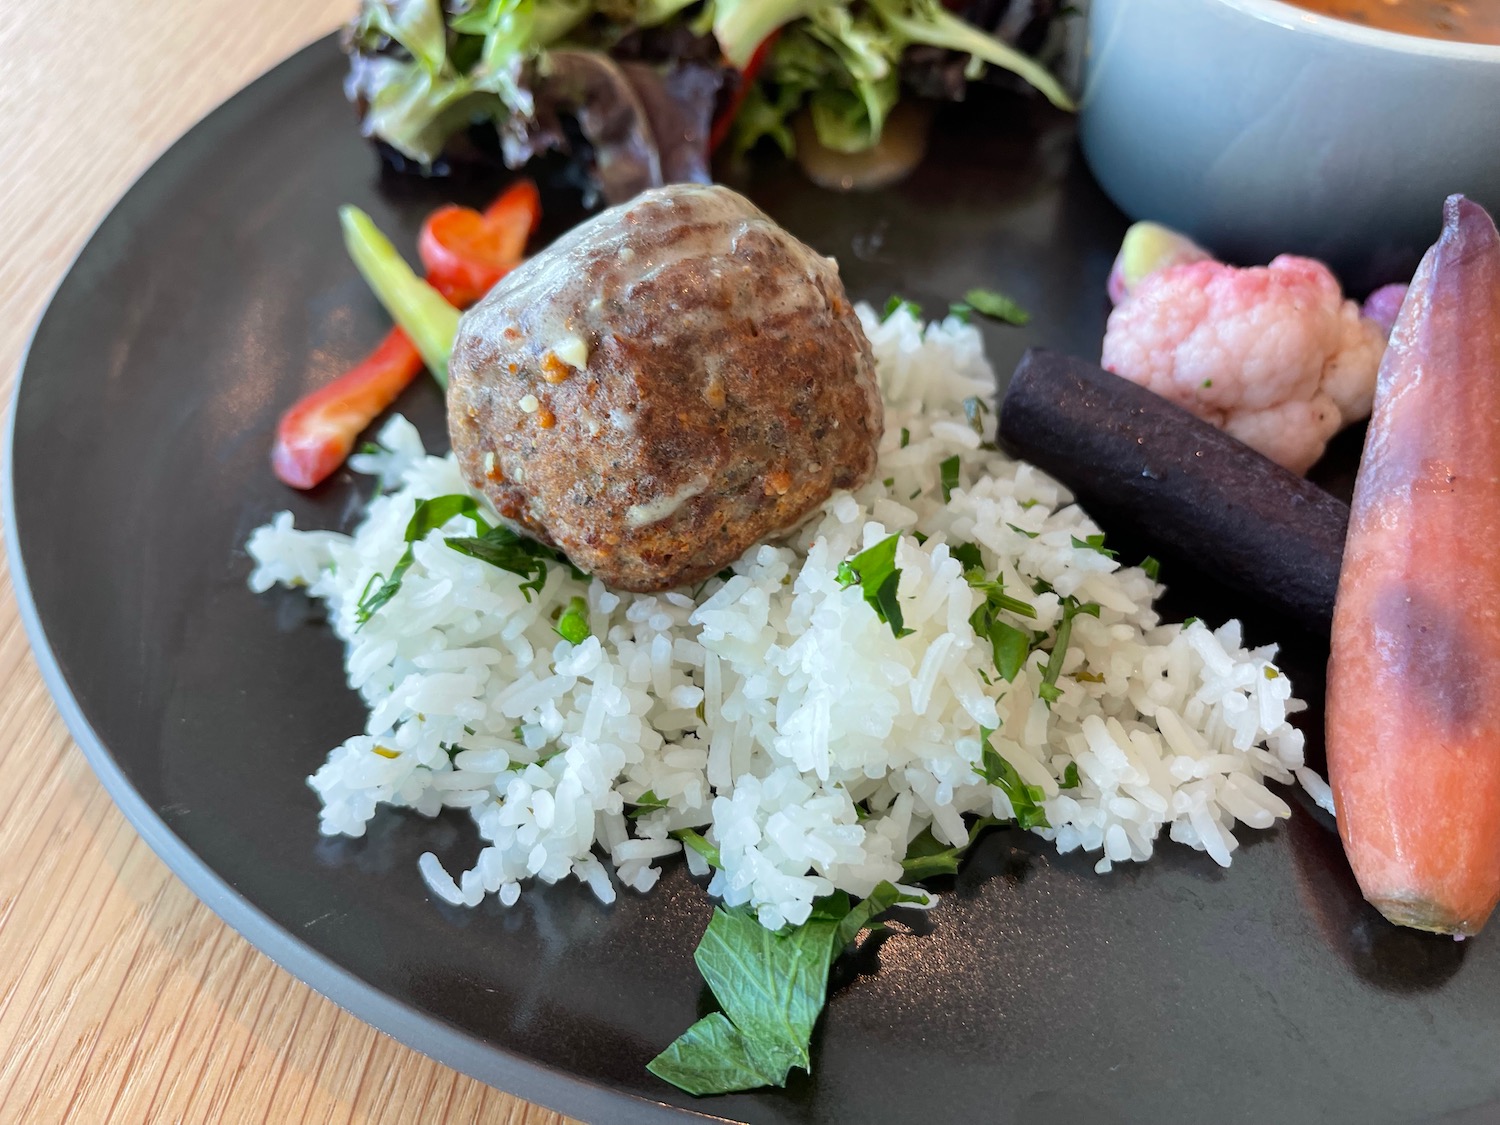 a plate of food with meatball and rice